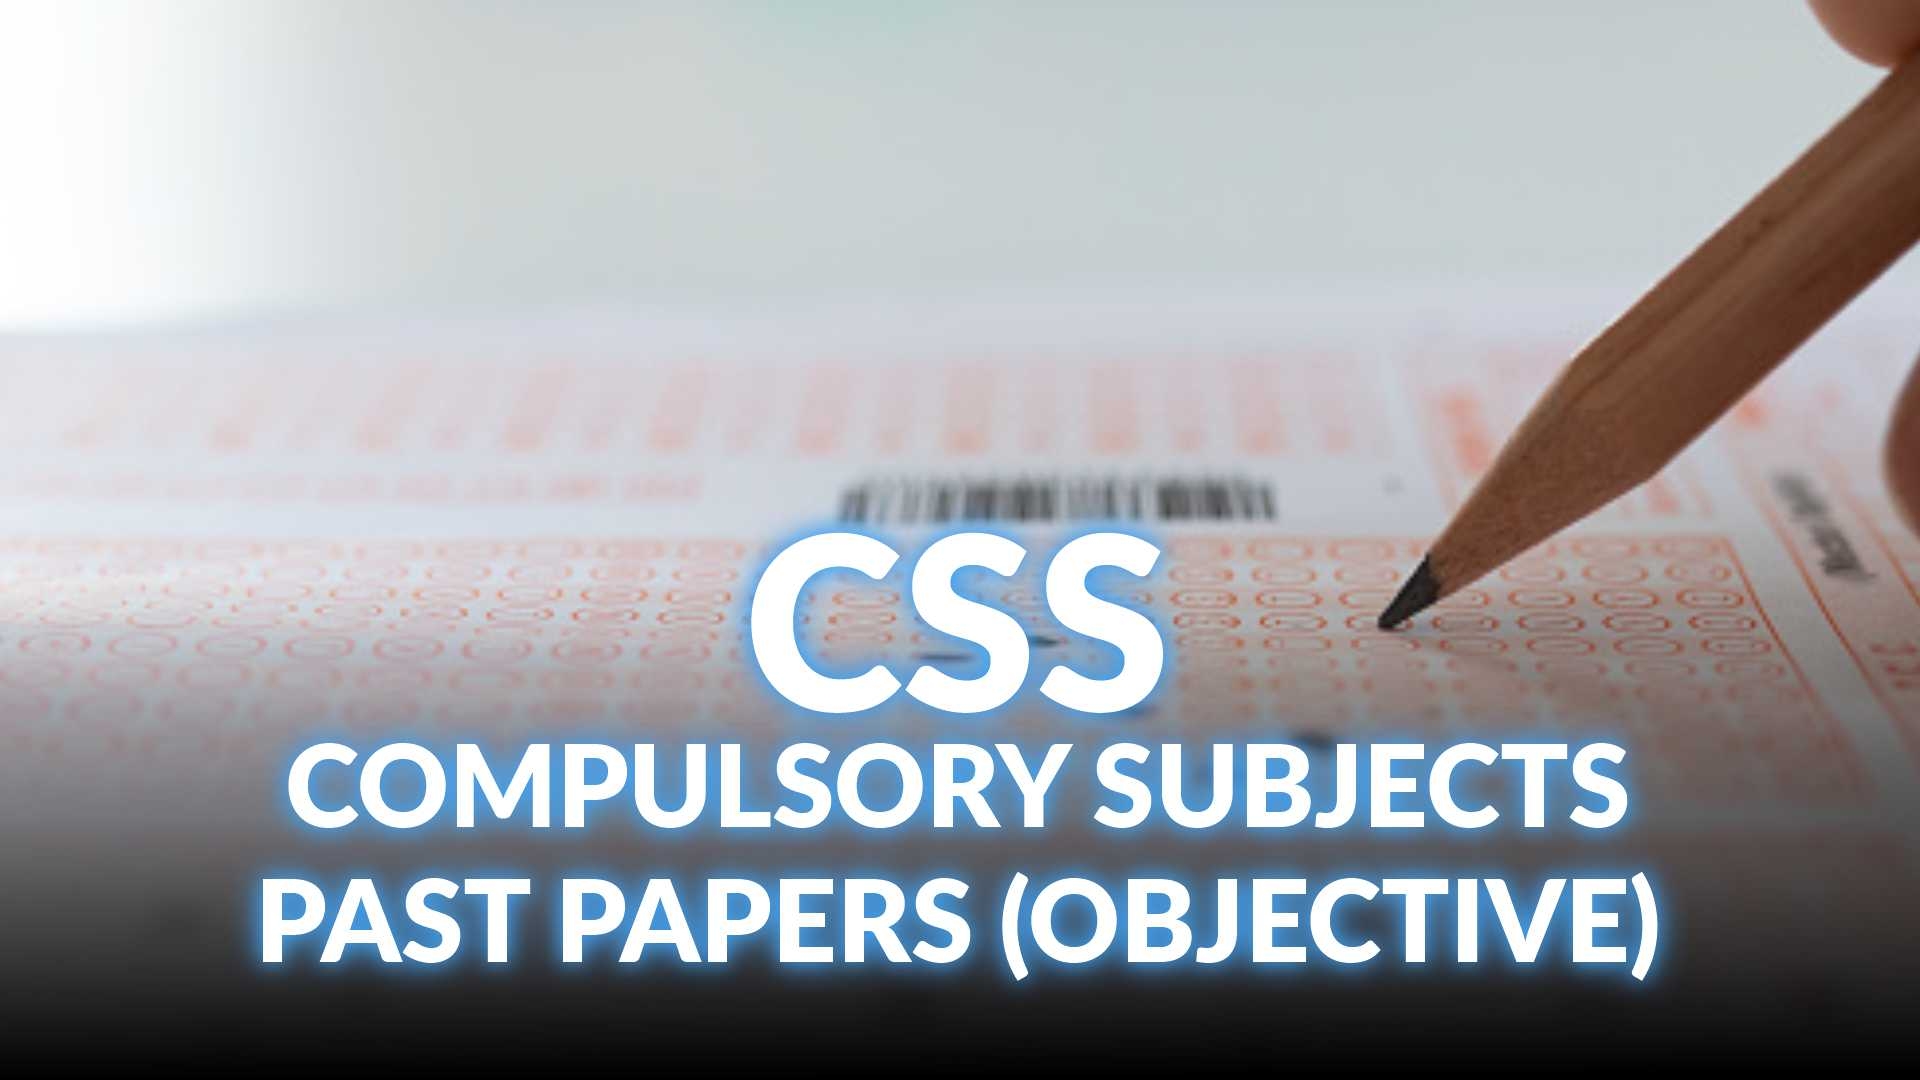 Past Papers CSS Compulsory Subjects (Objective)